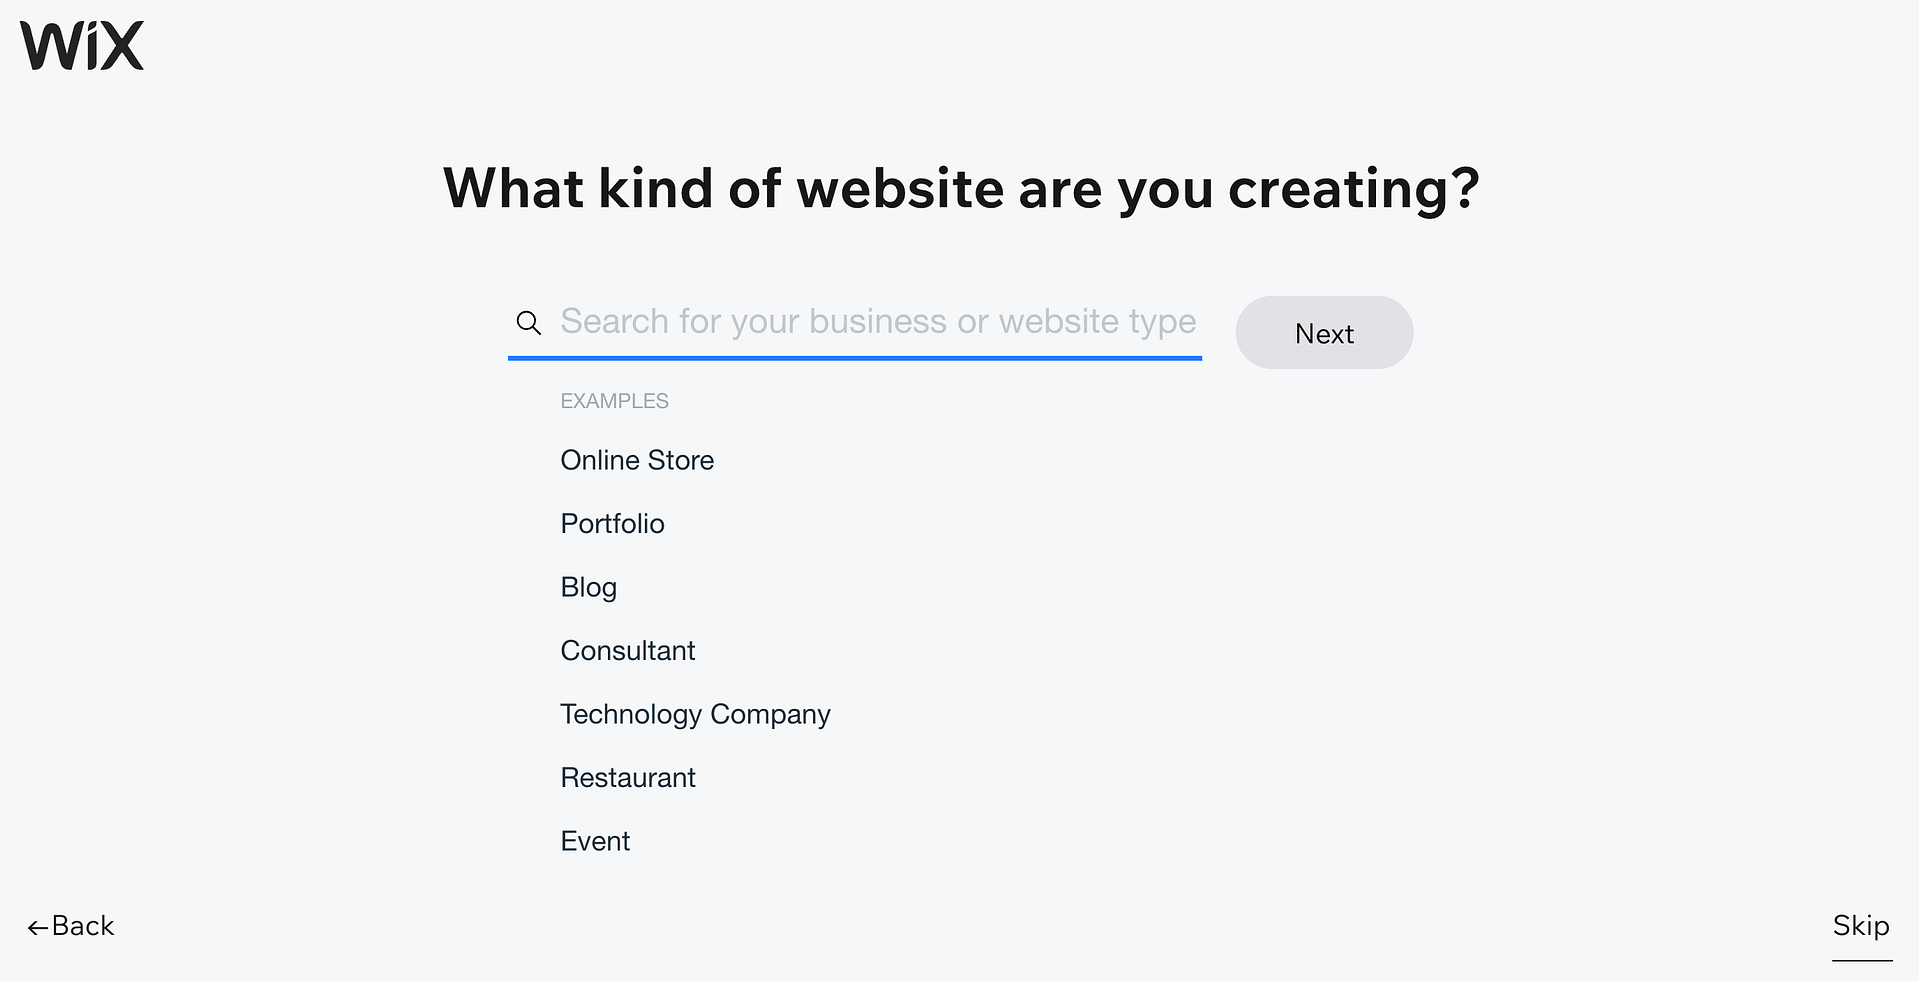 Shopify vs Wix vs Squarespace: Wix website setup question "What kind of website are you creating"